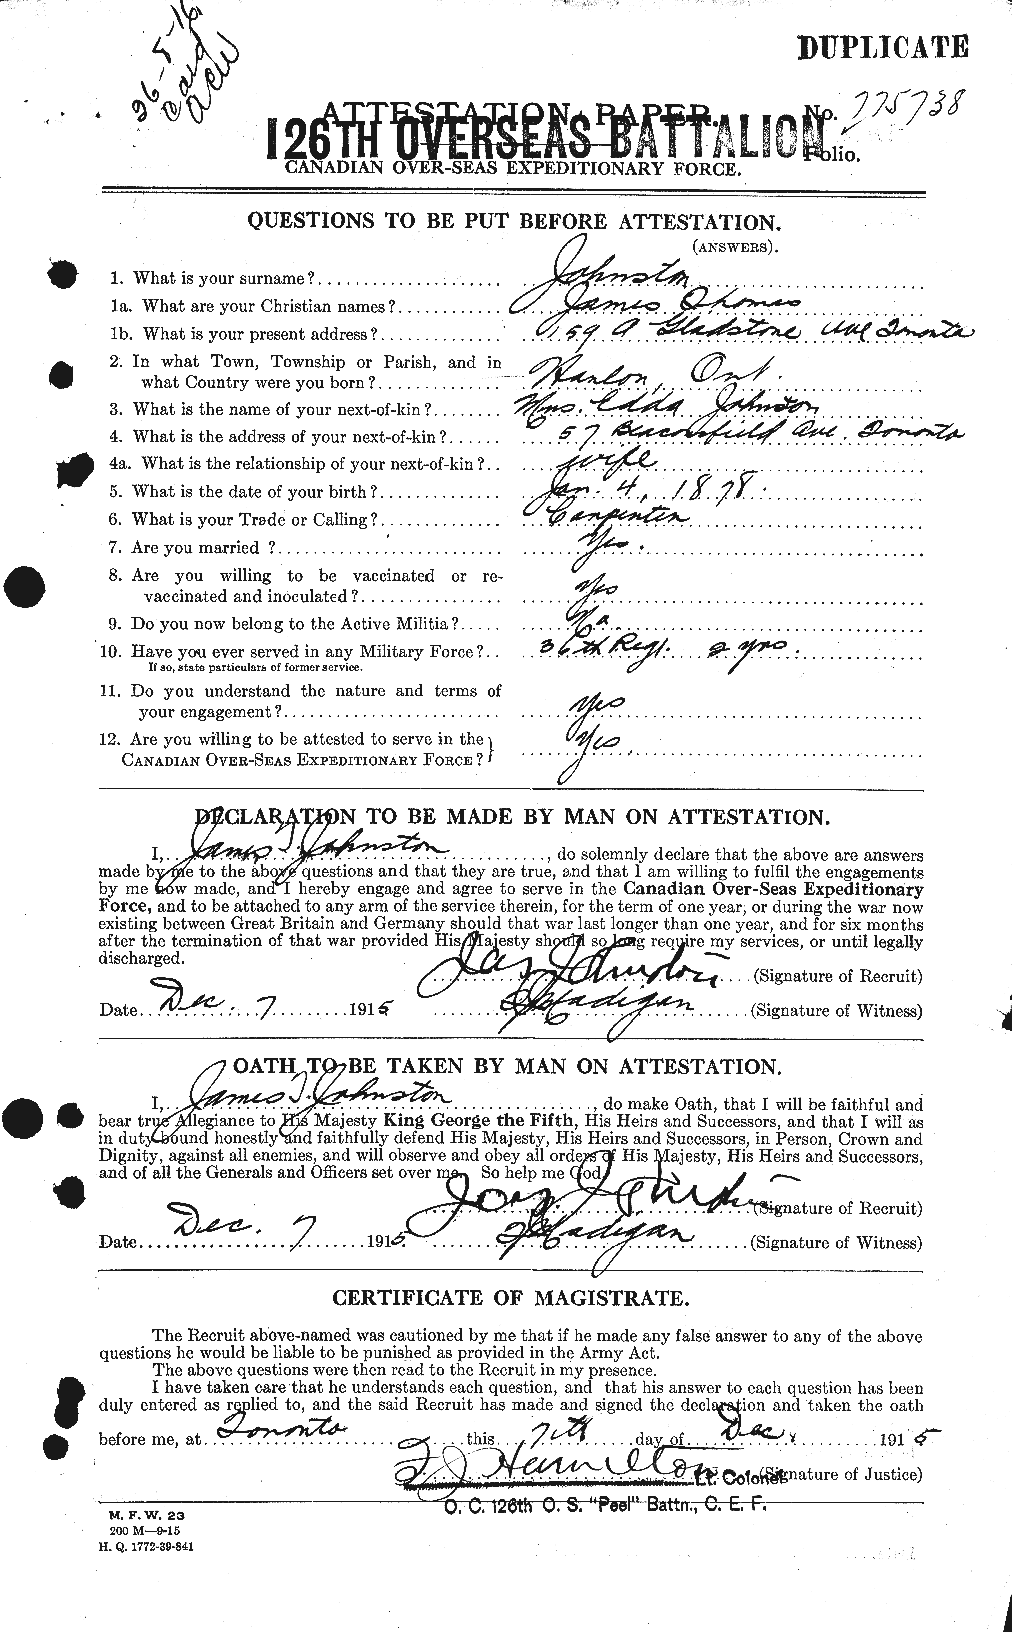 Personnel Records of the First World War - CEF 422754a